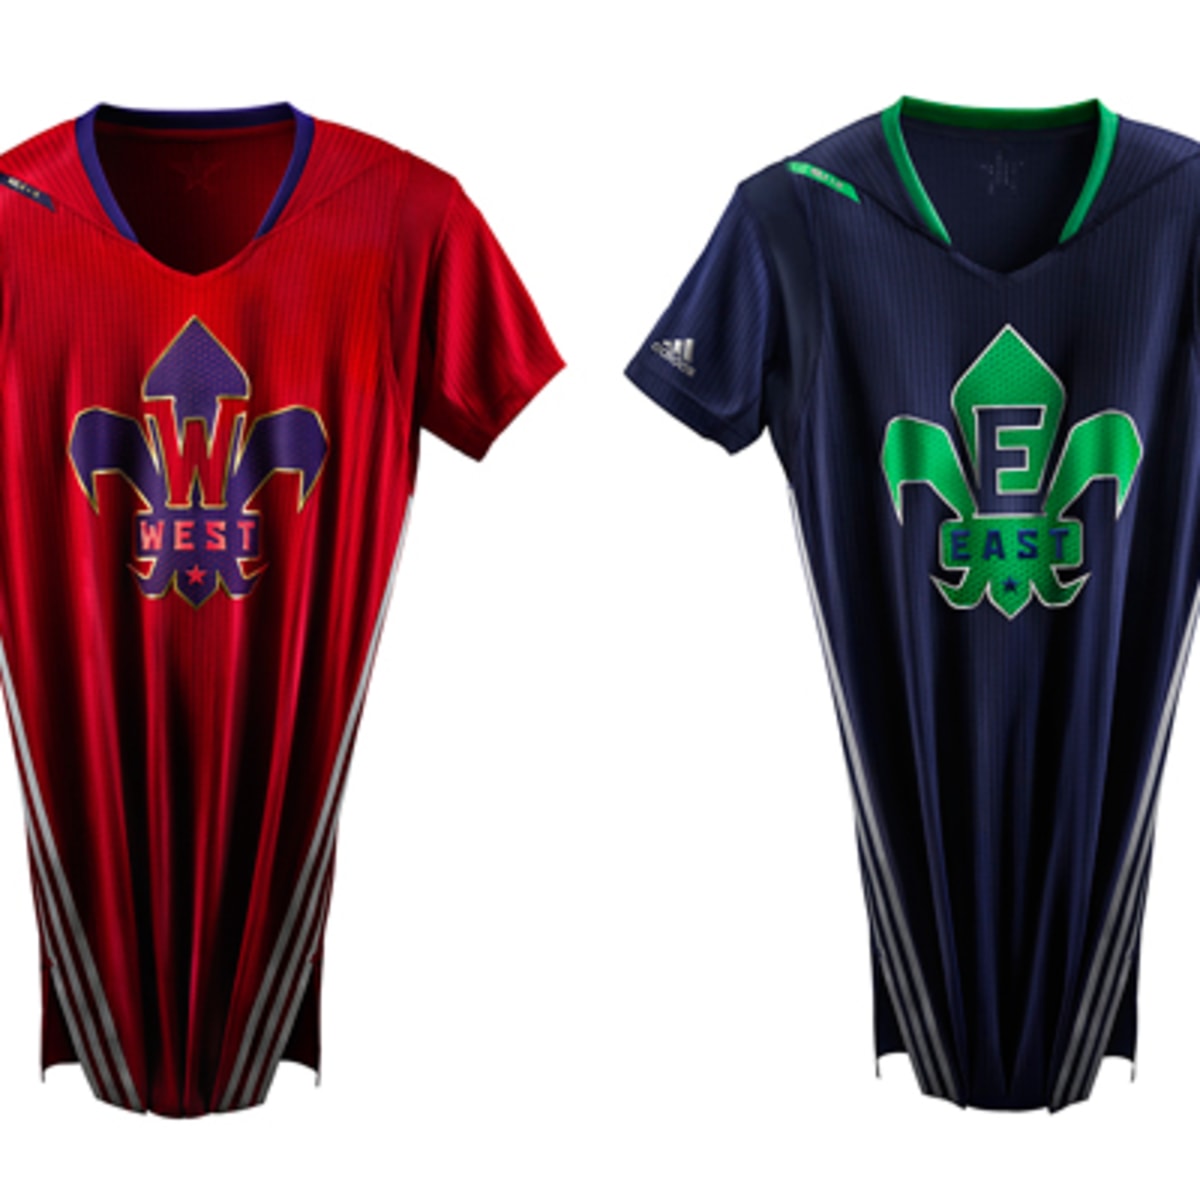 NBA unveils sleeved 2014 All-Star jerseys by Adidas - Sports